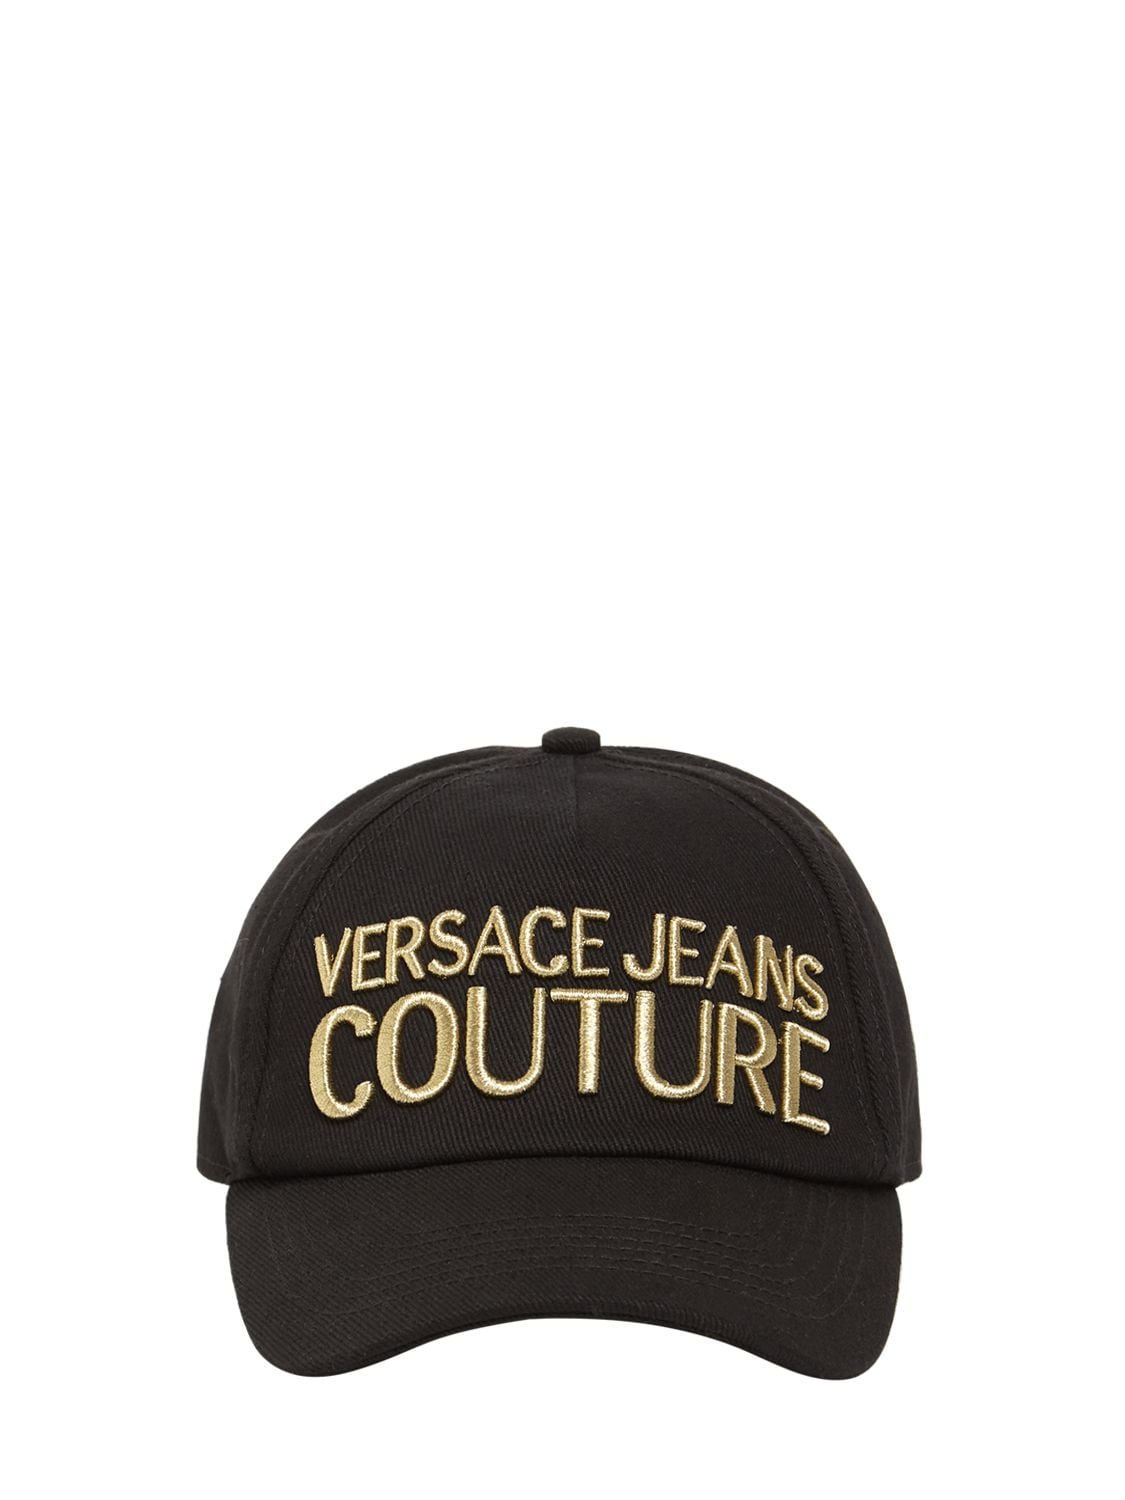 VERSACE JEANS COUTURE LOGO EMBROIDERY COTTON BASEBALL CAP,74IK2C017-RZG50